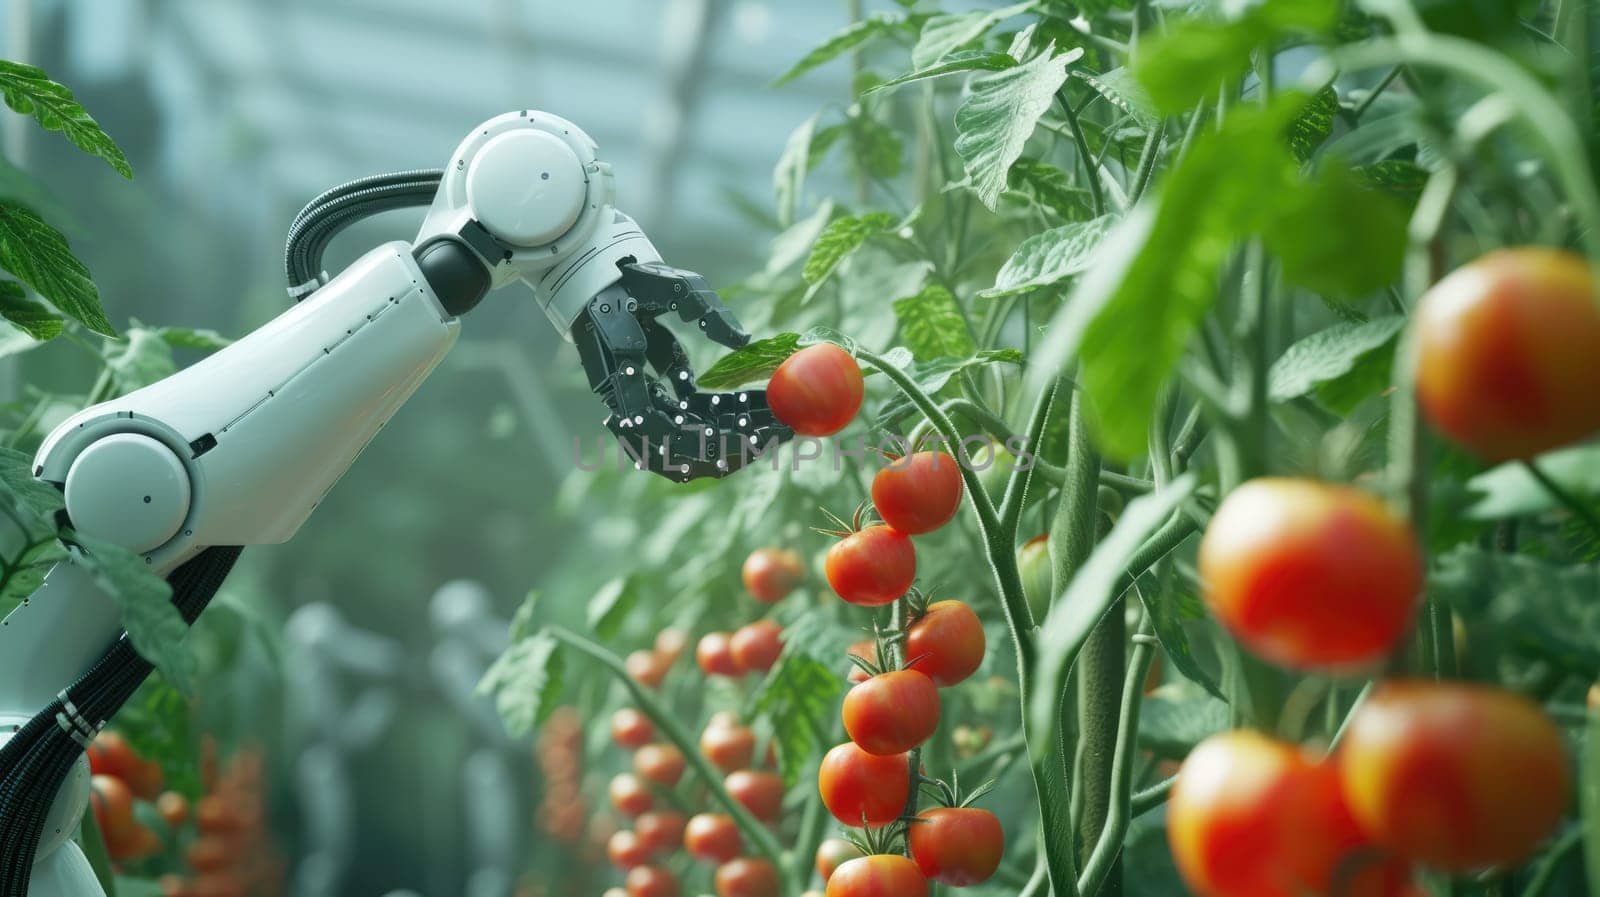 A robotic arm is picking tomatoes in a greenhouse AIG41 by biancoblue